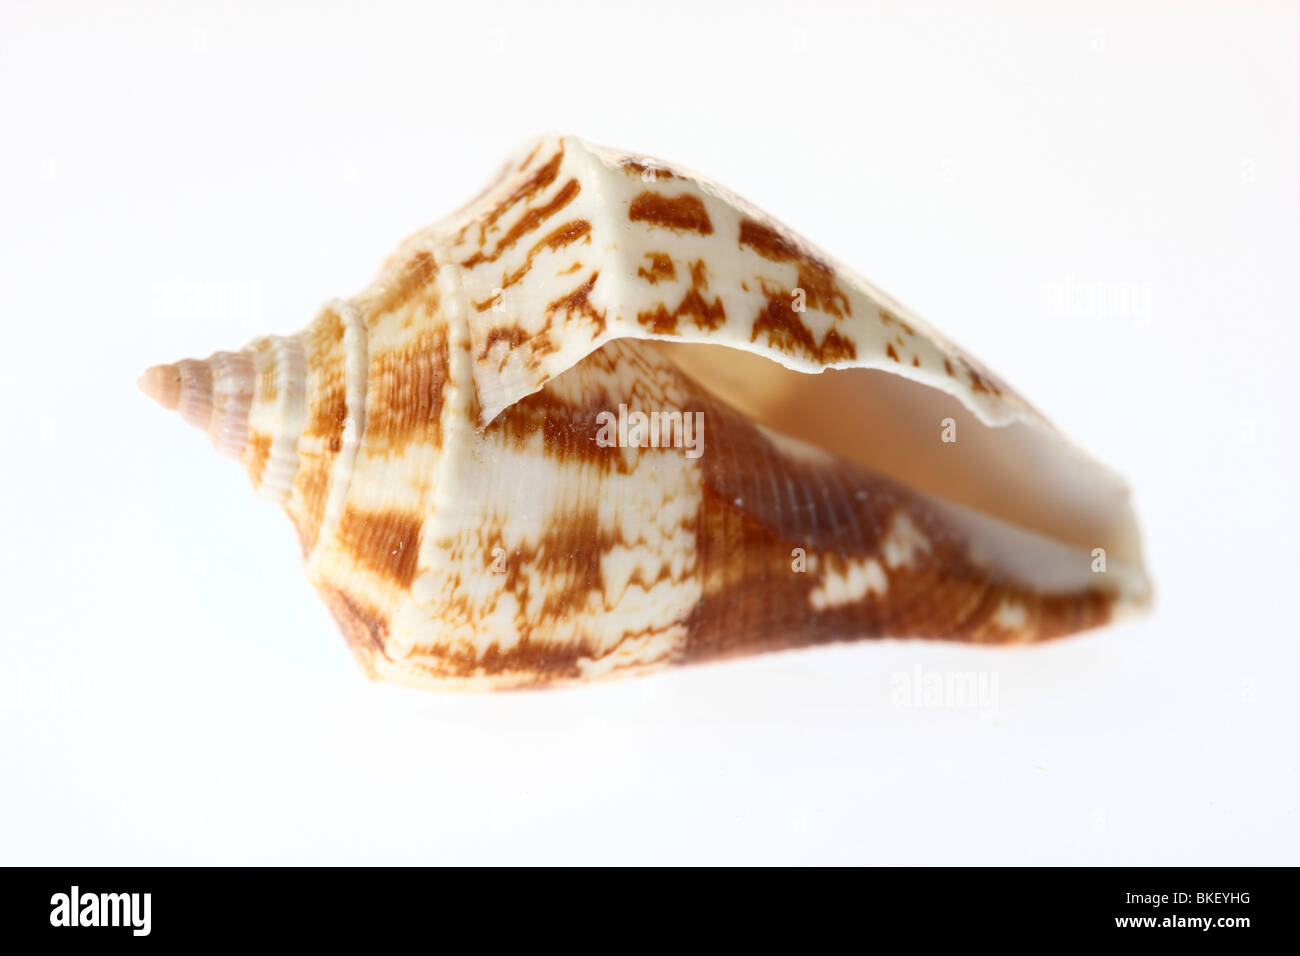 Shell, shell bivalves. Banque D'Images